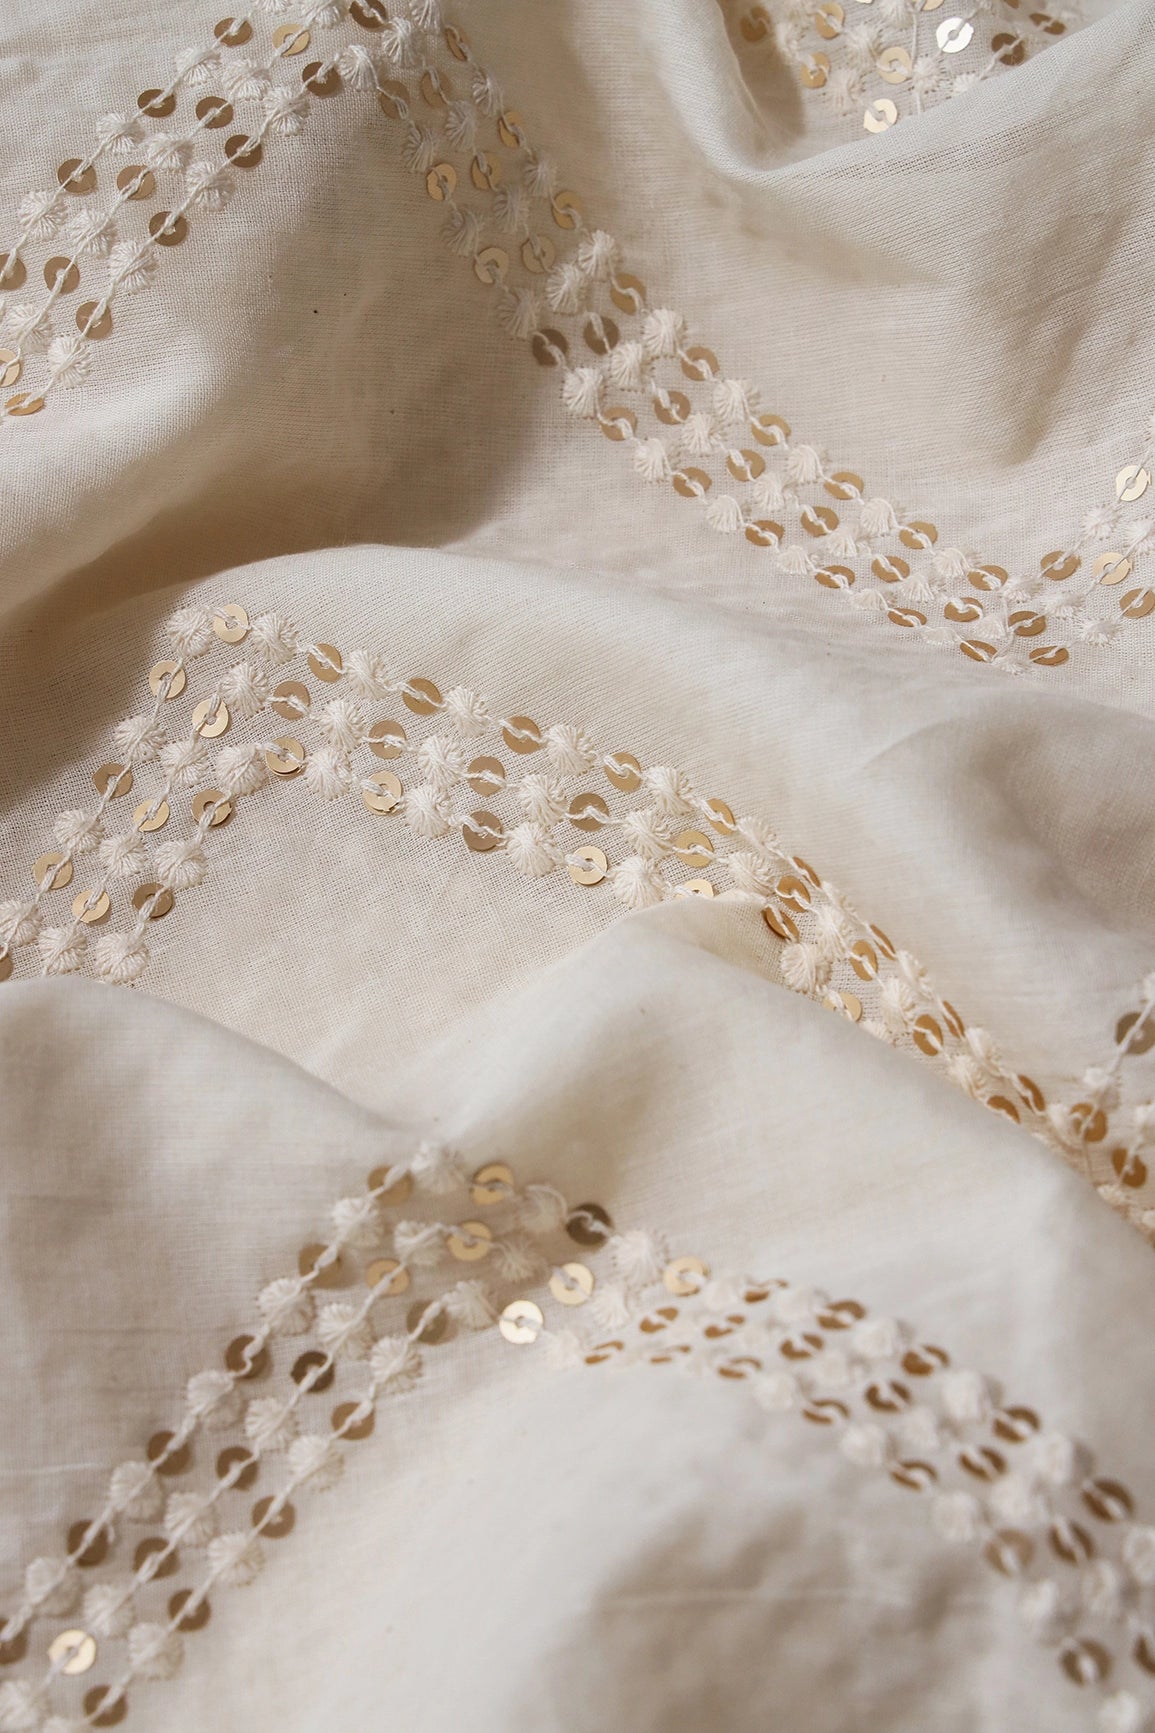 White Thread With Gold Sequins Beautiful Chevron Embroidery Work On Off White Organic Cotton Fabric